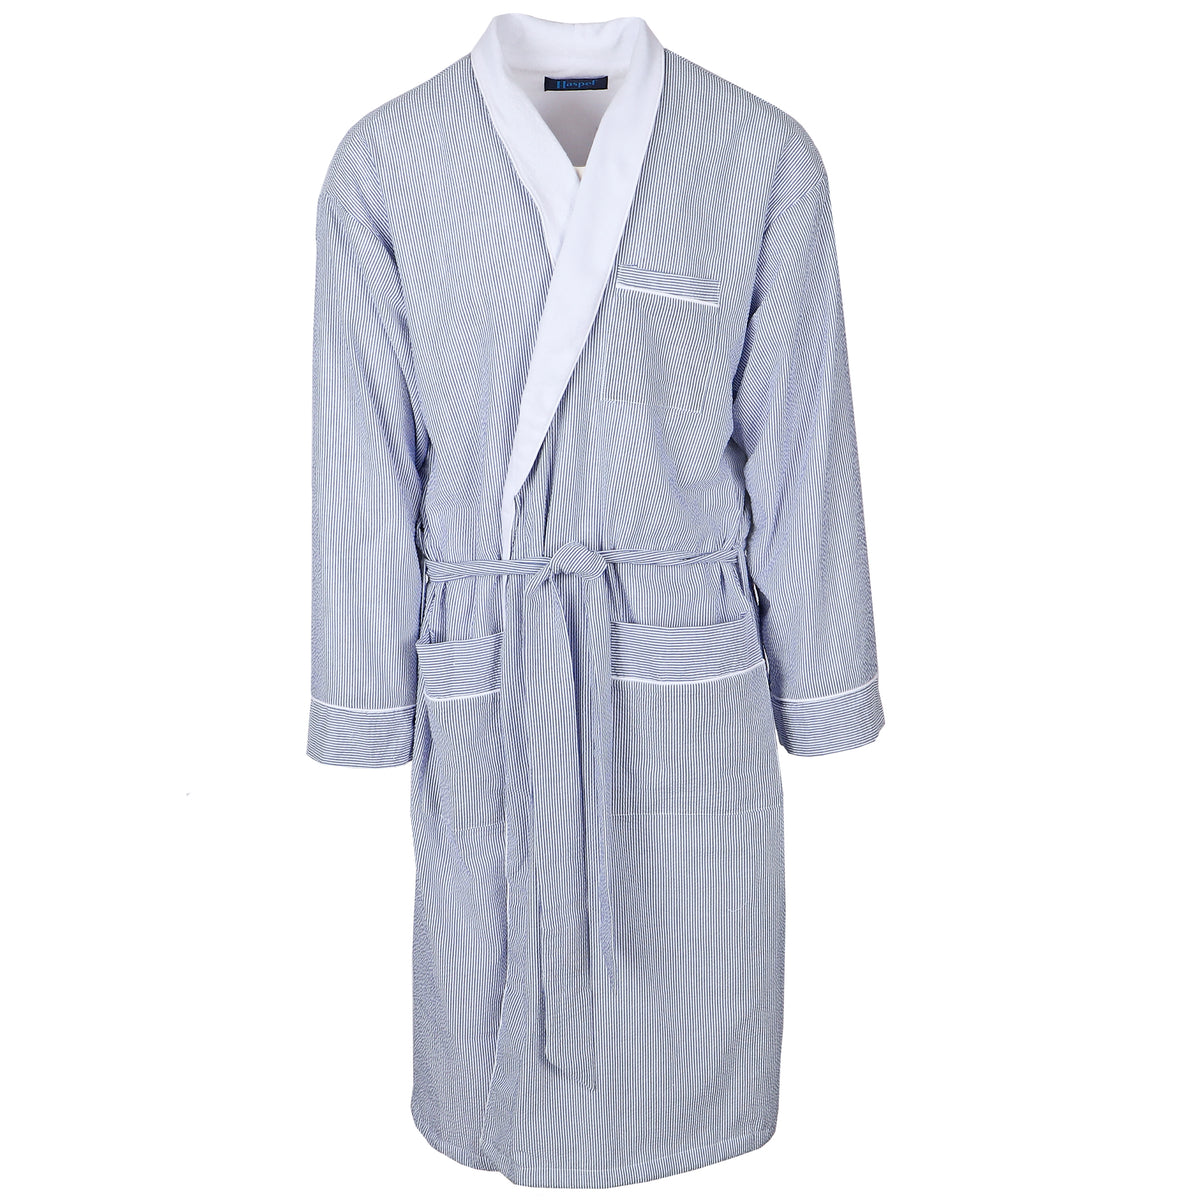 Soft and light and oh-so-right. Our seersucker robe is perfect for those lazy days around the house. Looks stunning while scratching absolutely nothing off of your honey-do list.  Lined with Moisture Wicking Terry Cloth Fabric  •  Machine Washable  •  100% Cotton Seersucker  •  Left Chest Pocket  •  Two Patch Pockets  •  Inner Tie  •  Outer Belt Tie with Loops  •  Navy &amp; White Seersucker  •  One Size Fits All  •  Imported